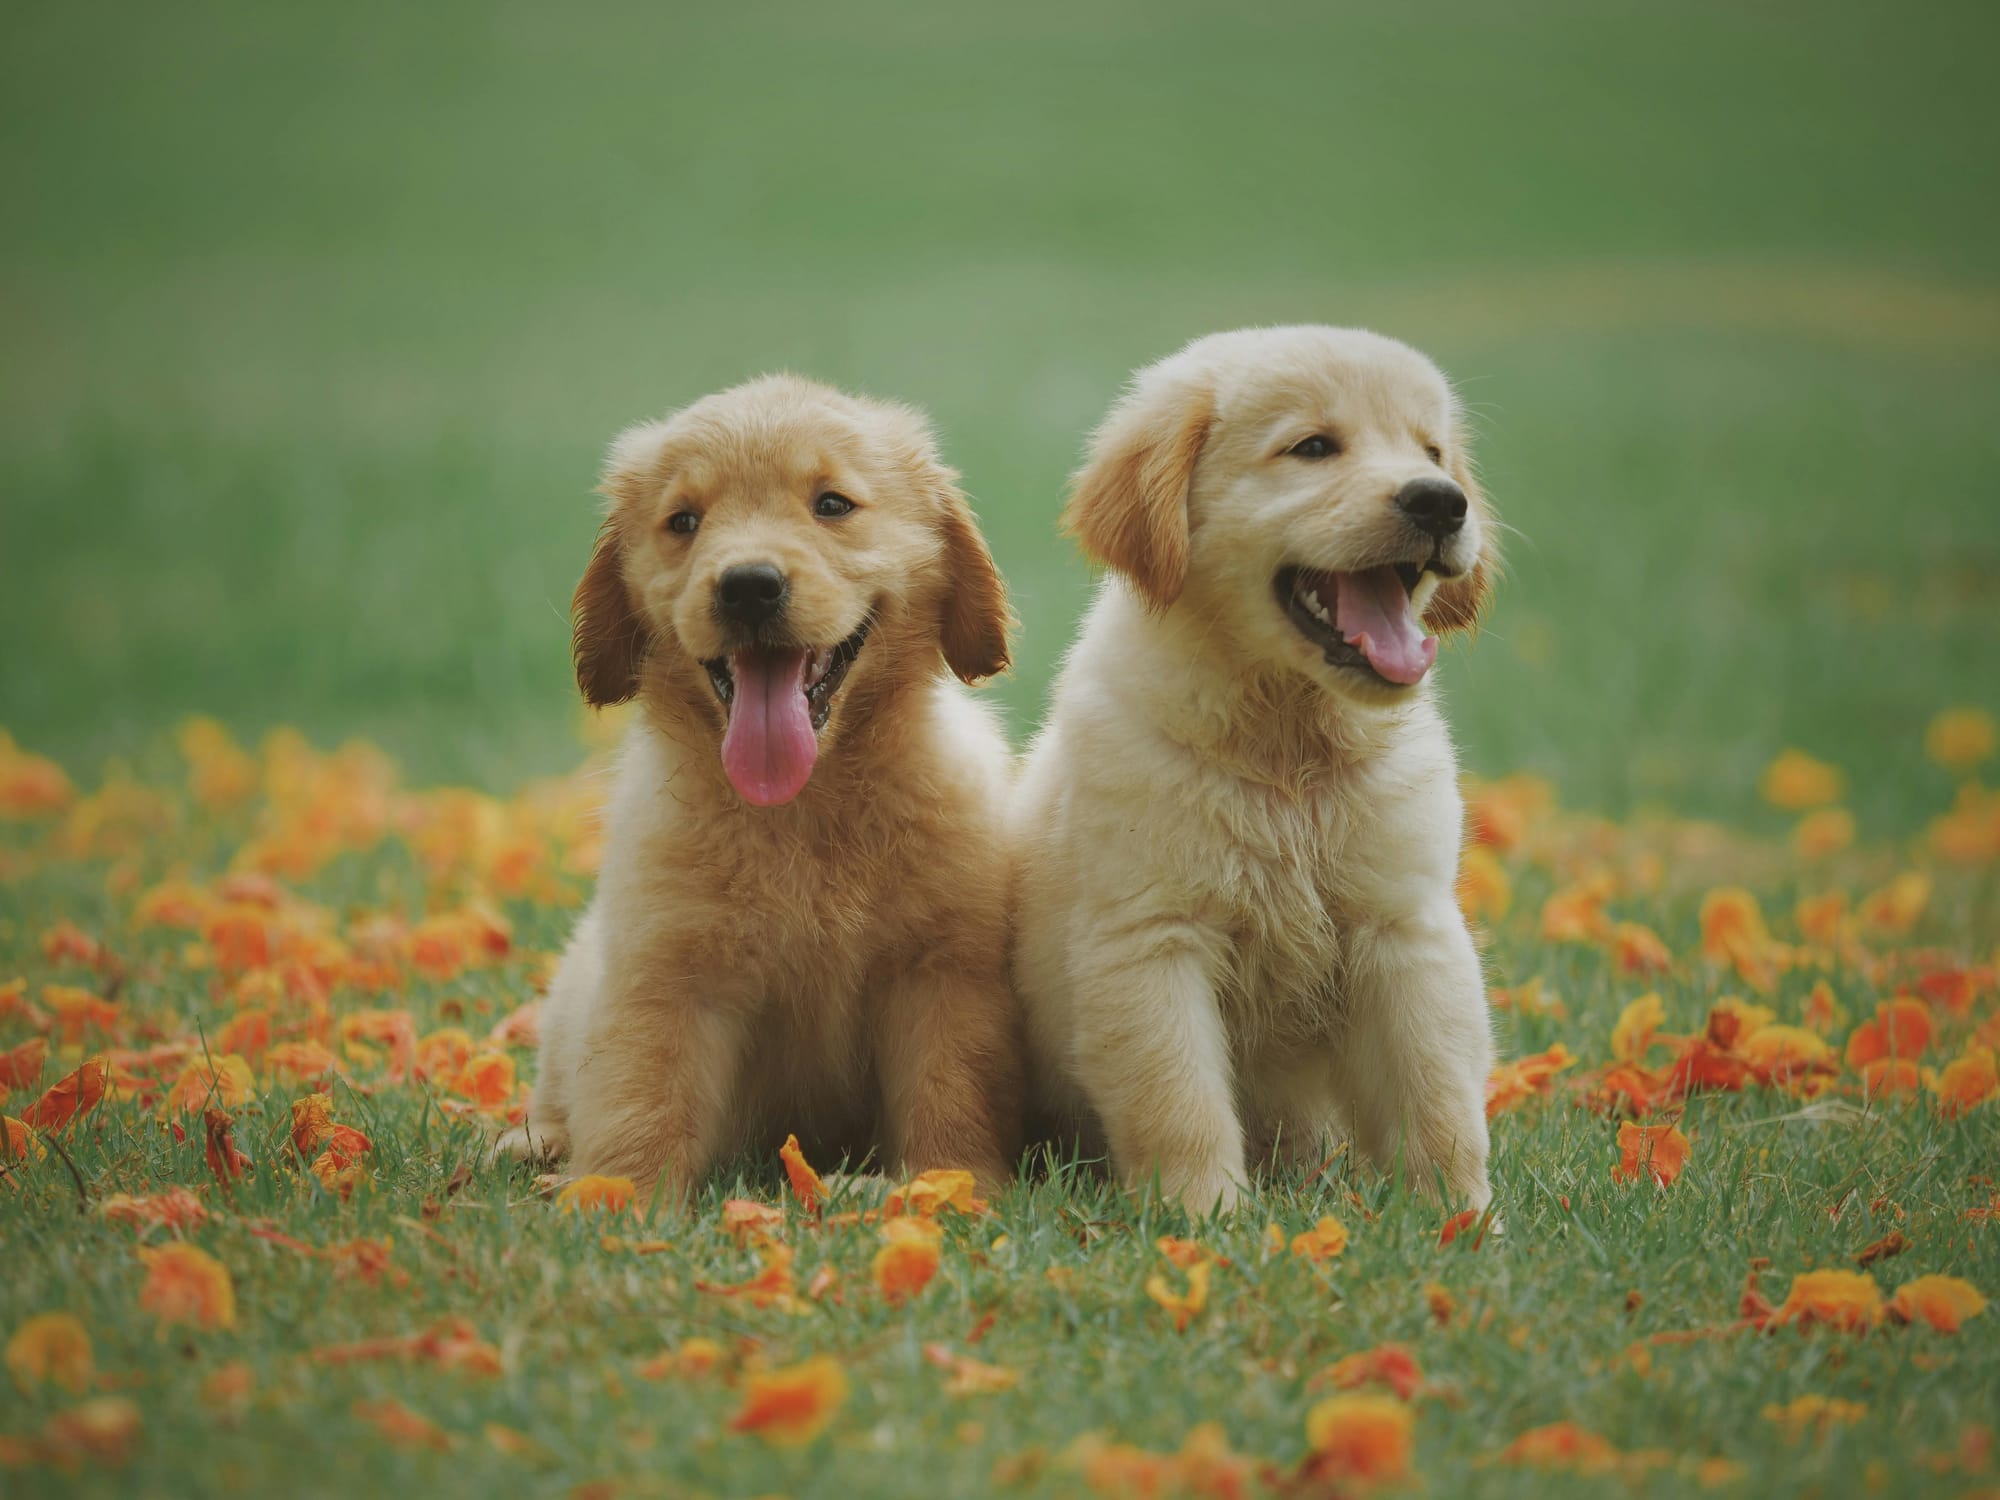 An image of two cute Lab puppies posing